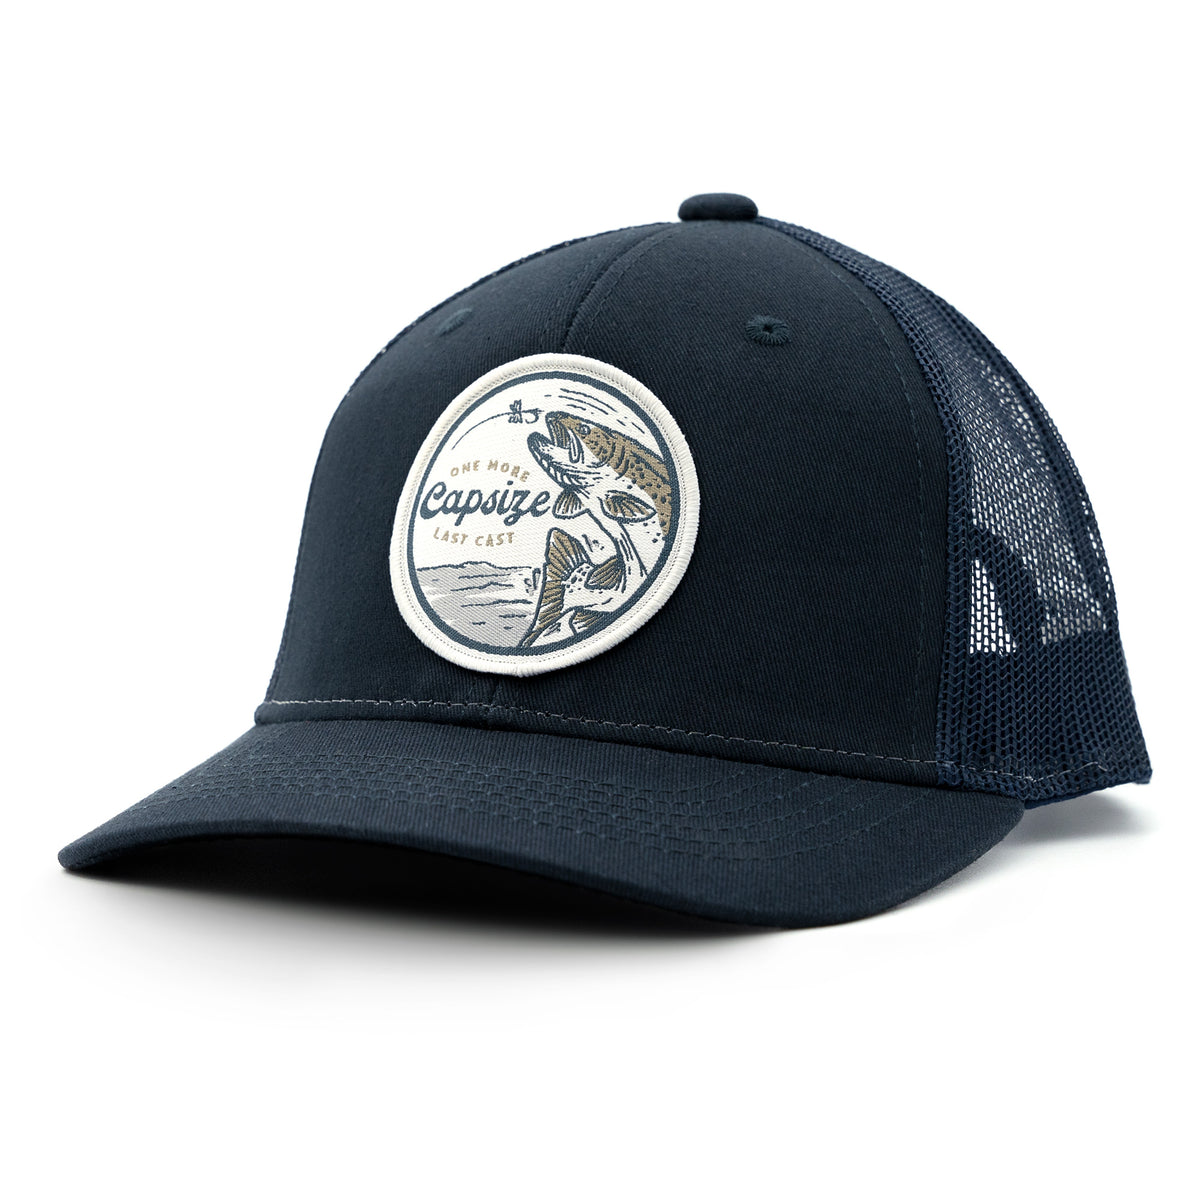 Kids Fishing Hats  Capsize Fly Fishing Tagged Fly Fishing